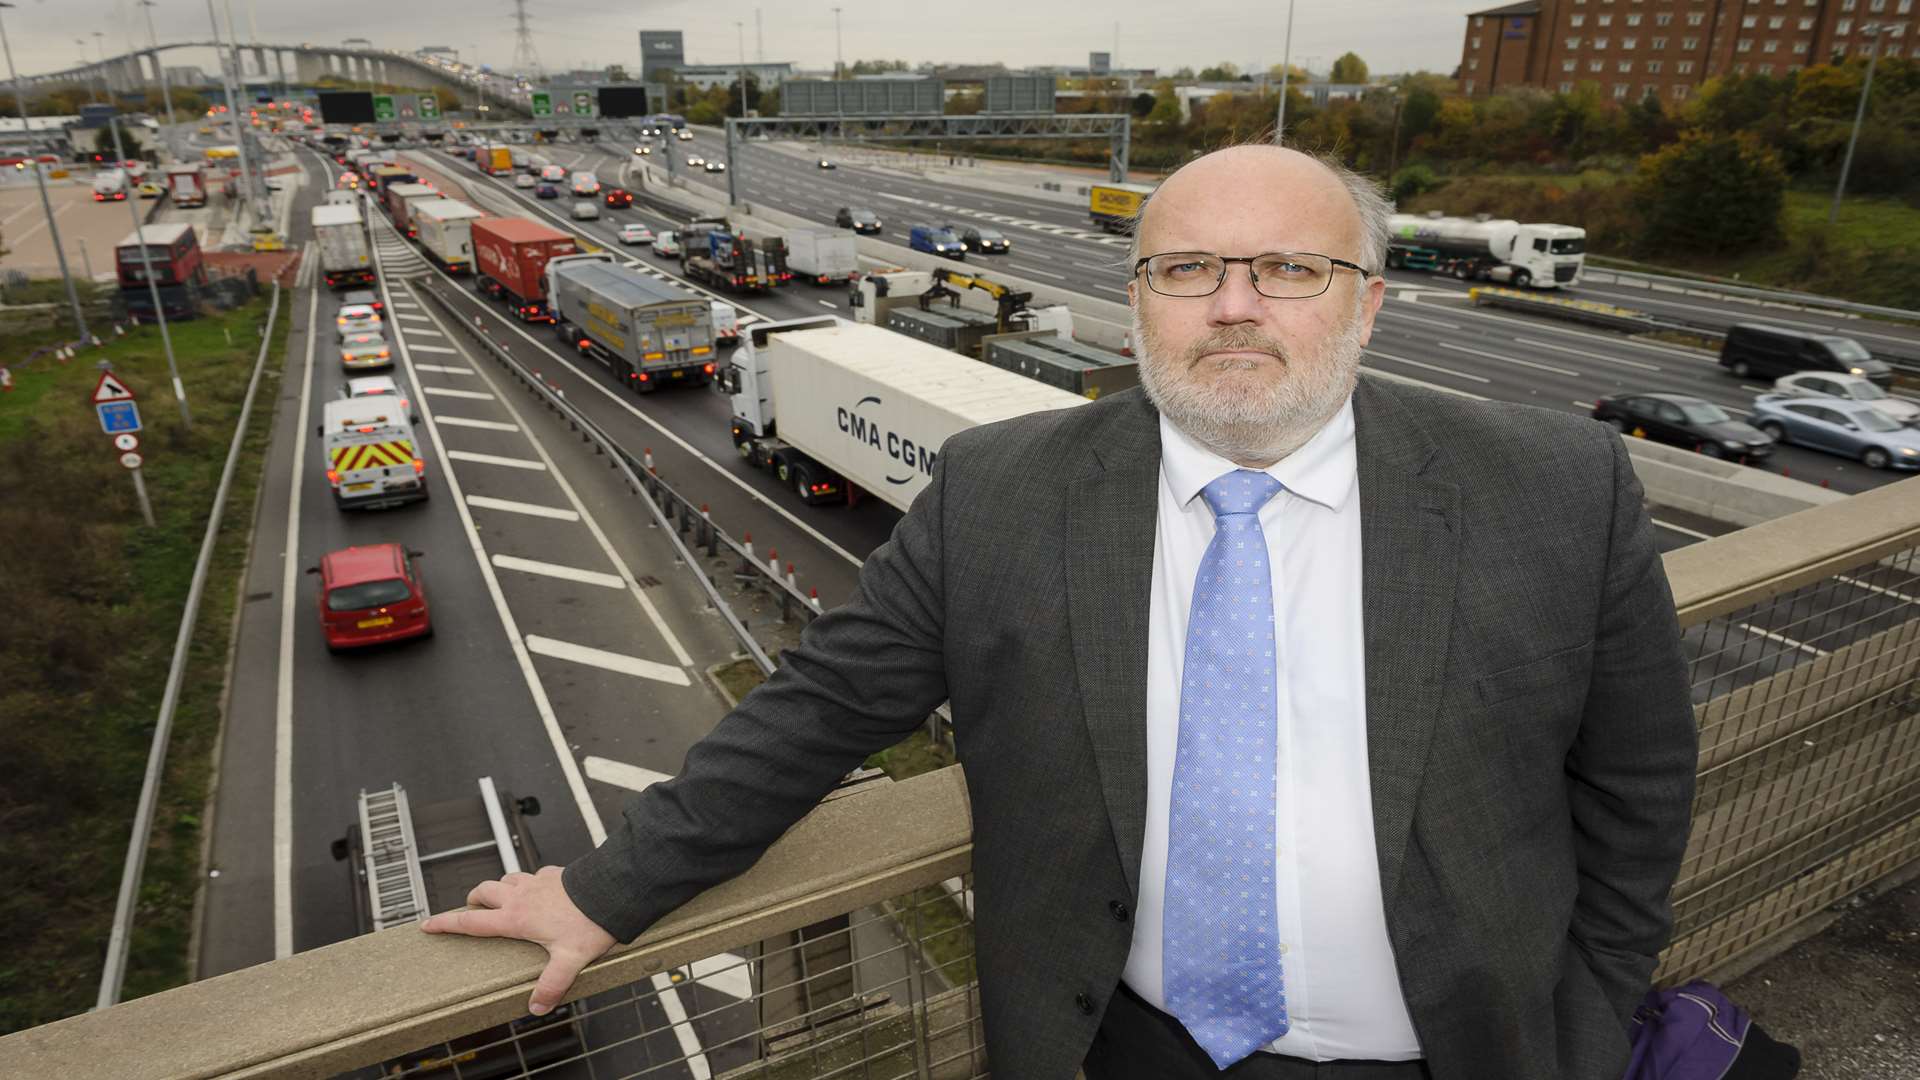 Jeremy Kite, leader of Dartford Council, has already written to the Prime Minister regarding the ongoing traffic congestion in and around Dartford